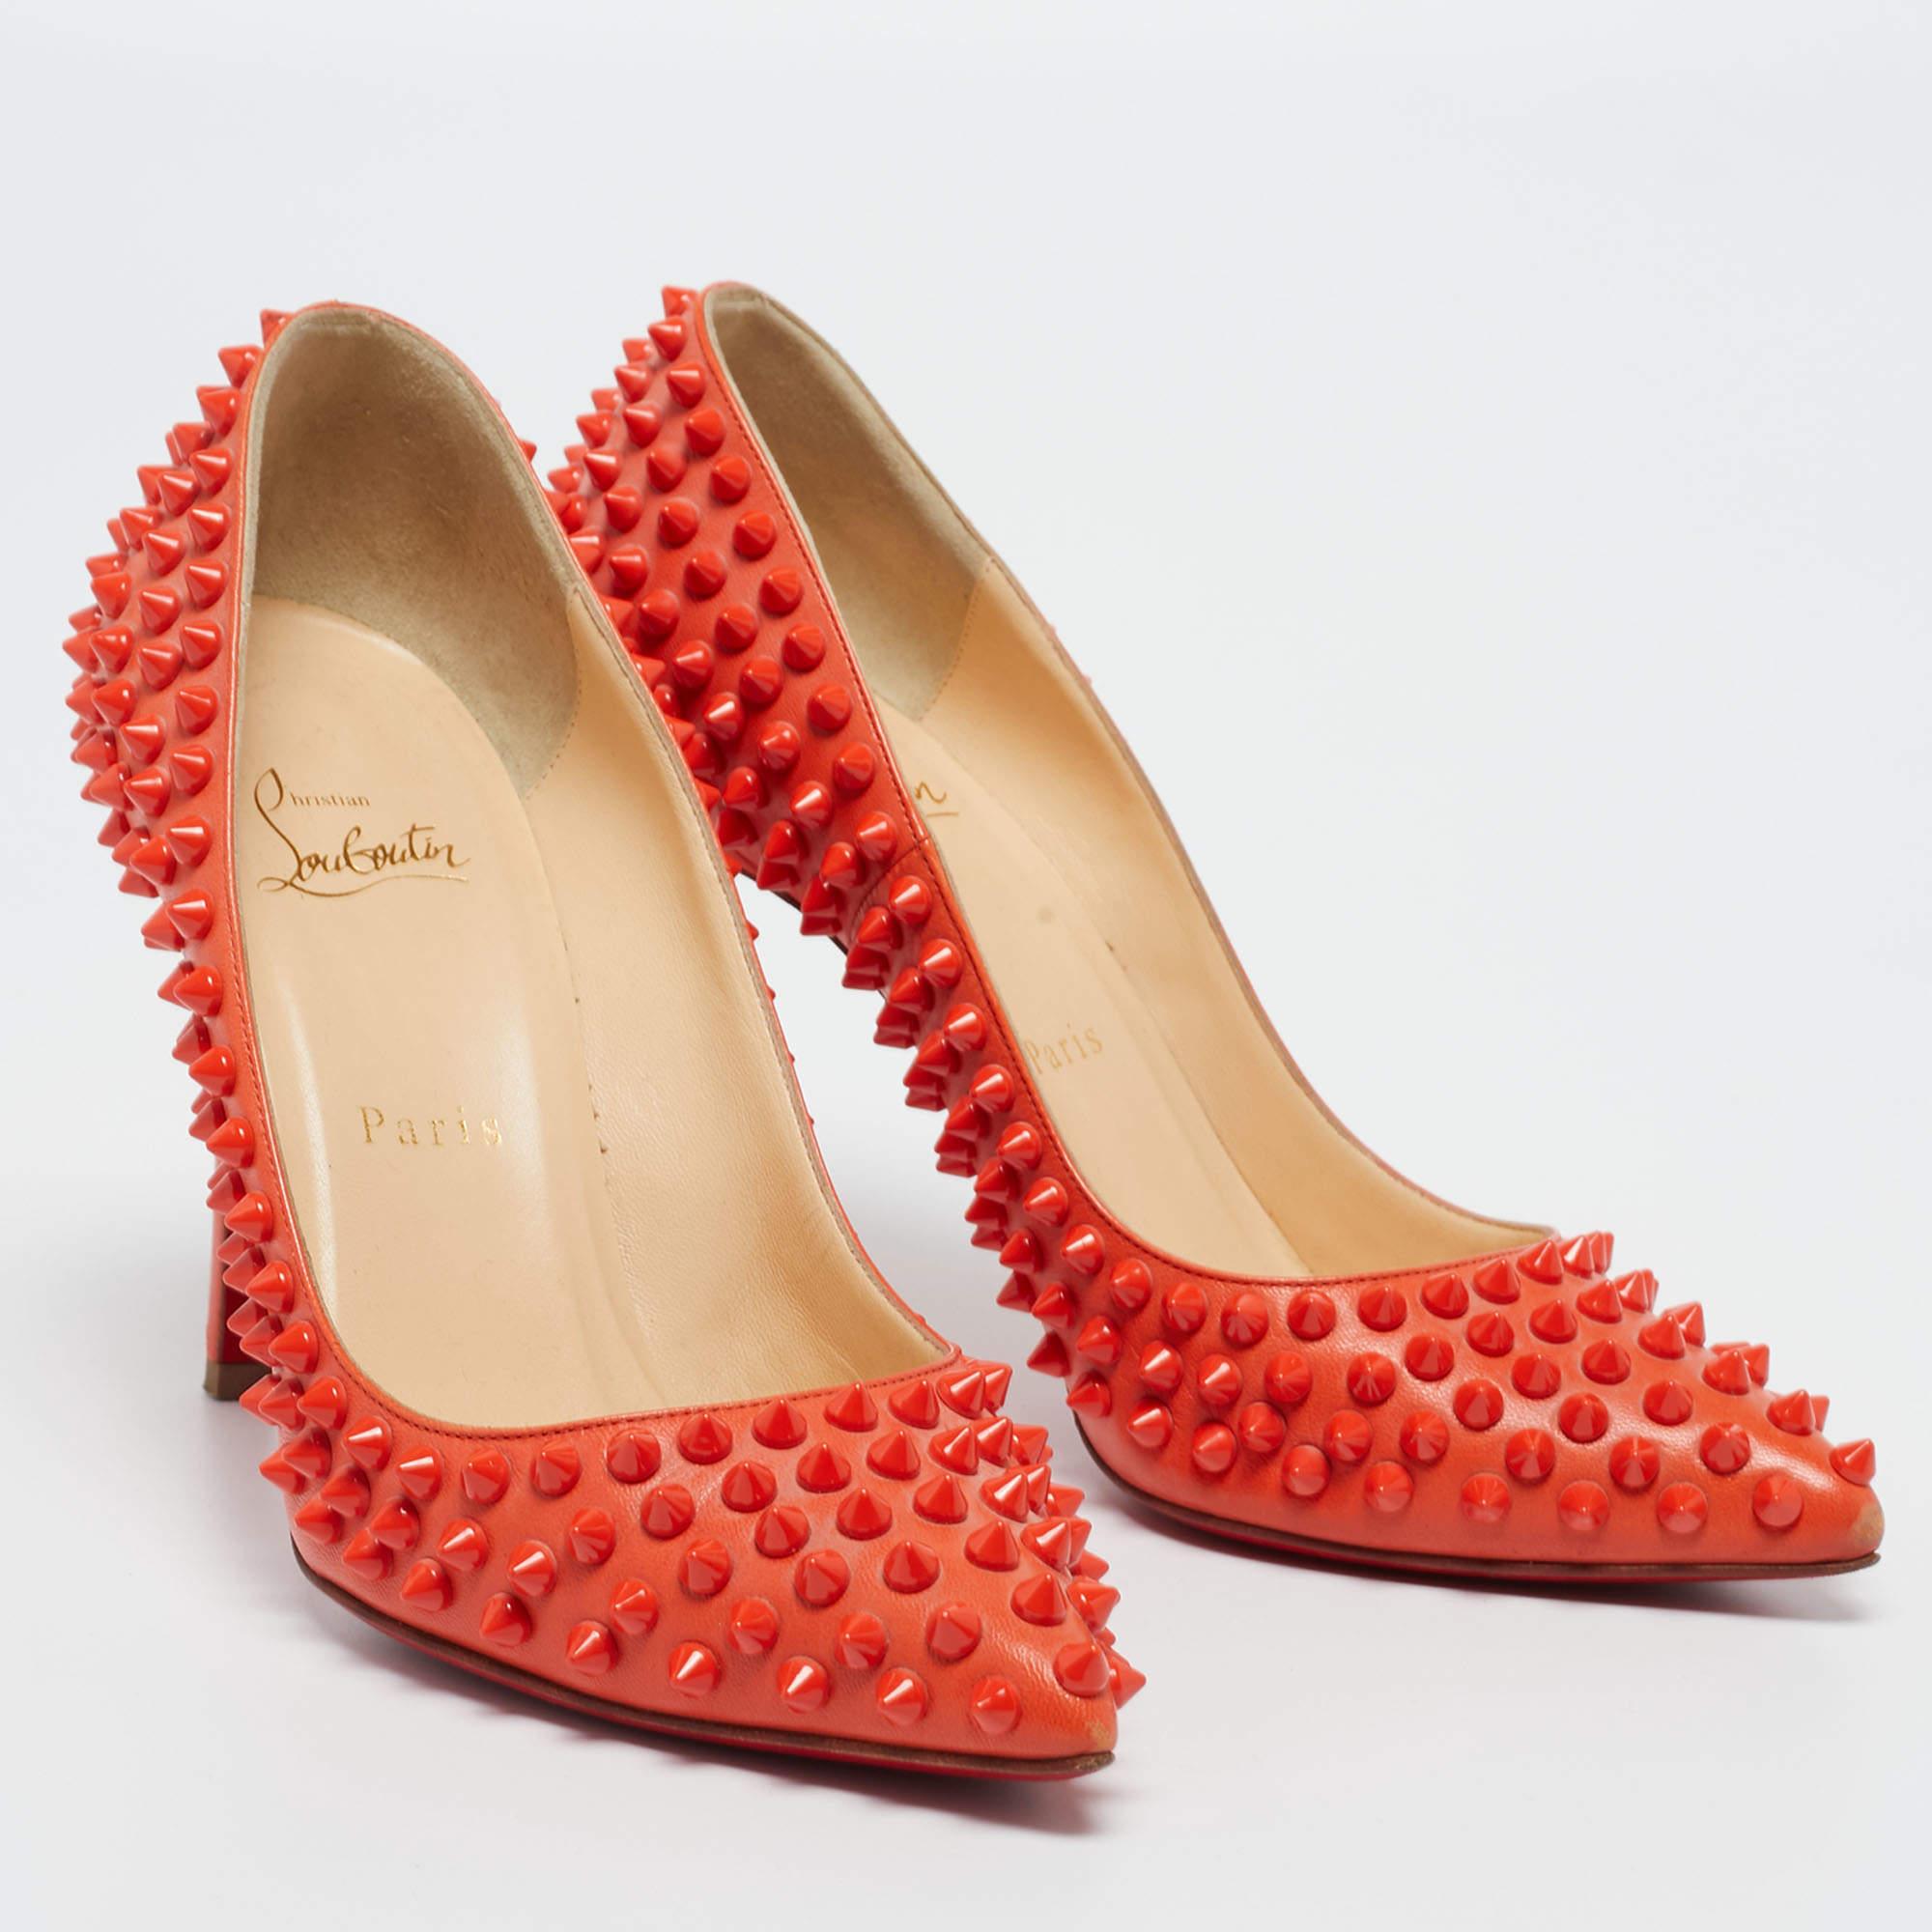 Dazzle everyone with these Louboutins! Crafted from leather, these orange pumps have pointed toes, multiple spikes adorning the exterior, and 10 cm heels. Complete with the signature red soles, this pair embodies the fine art of shoemaking.

